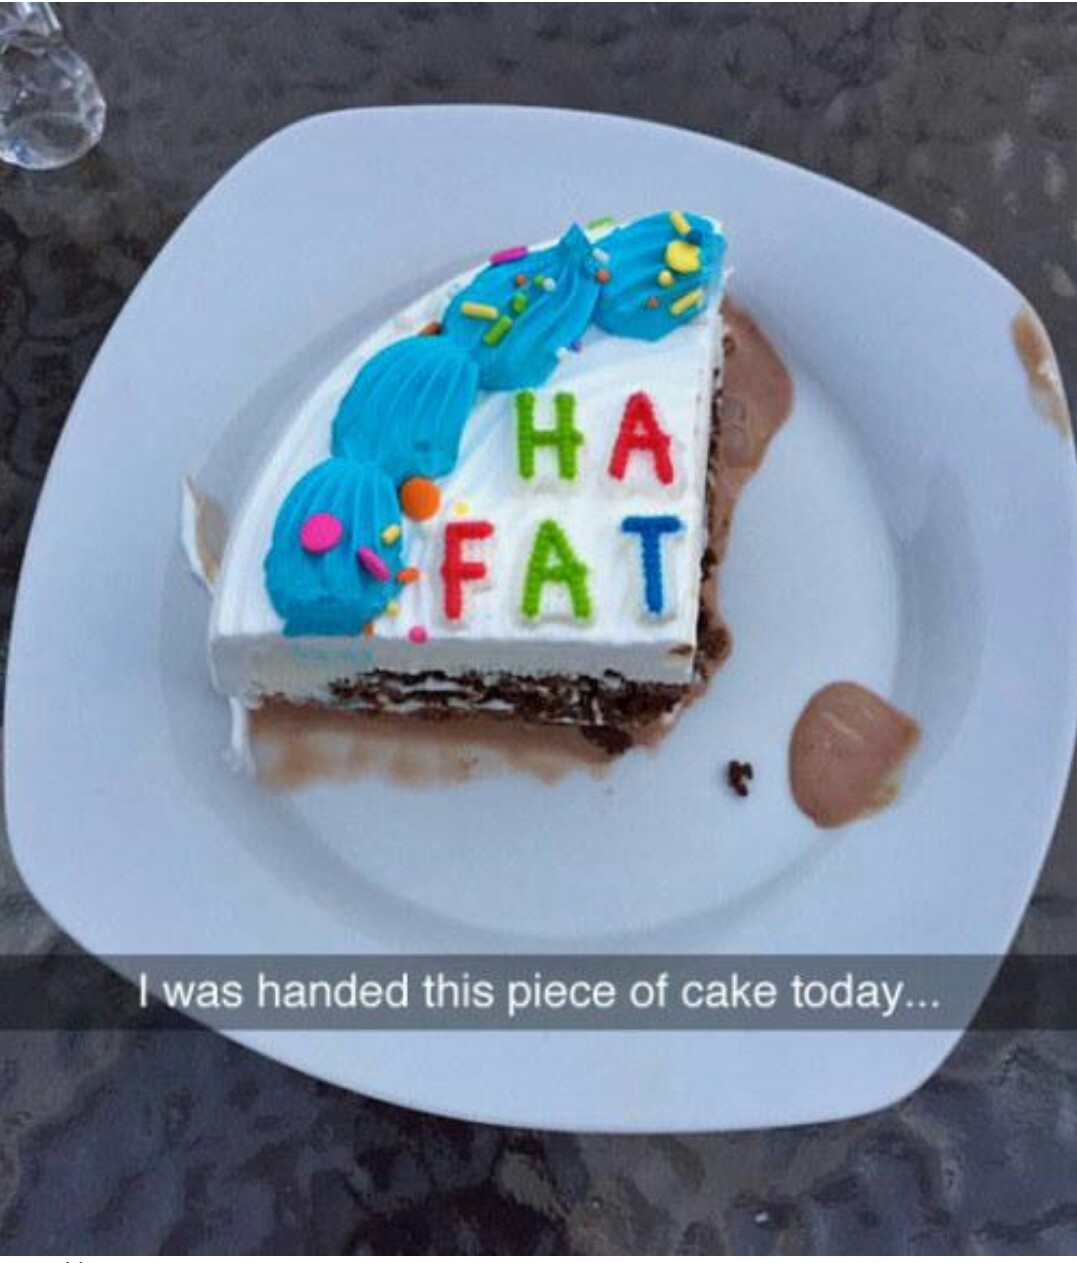 funny memes - fun randoms - one piece of cake won t hurt - Fat I was handed this piece of cake today...